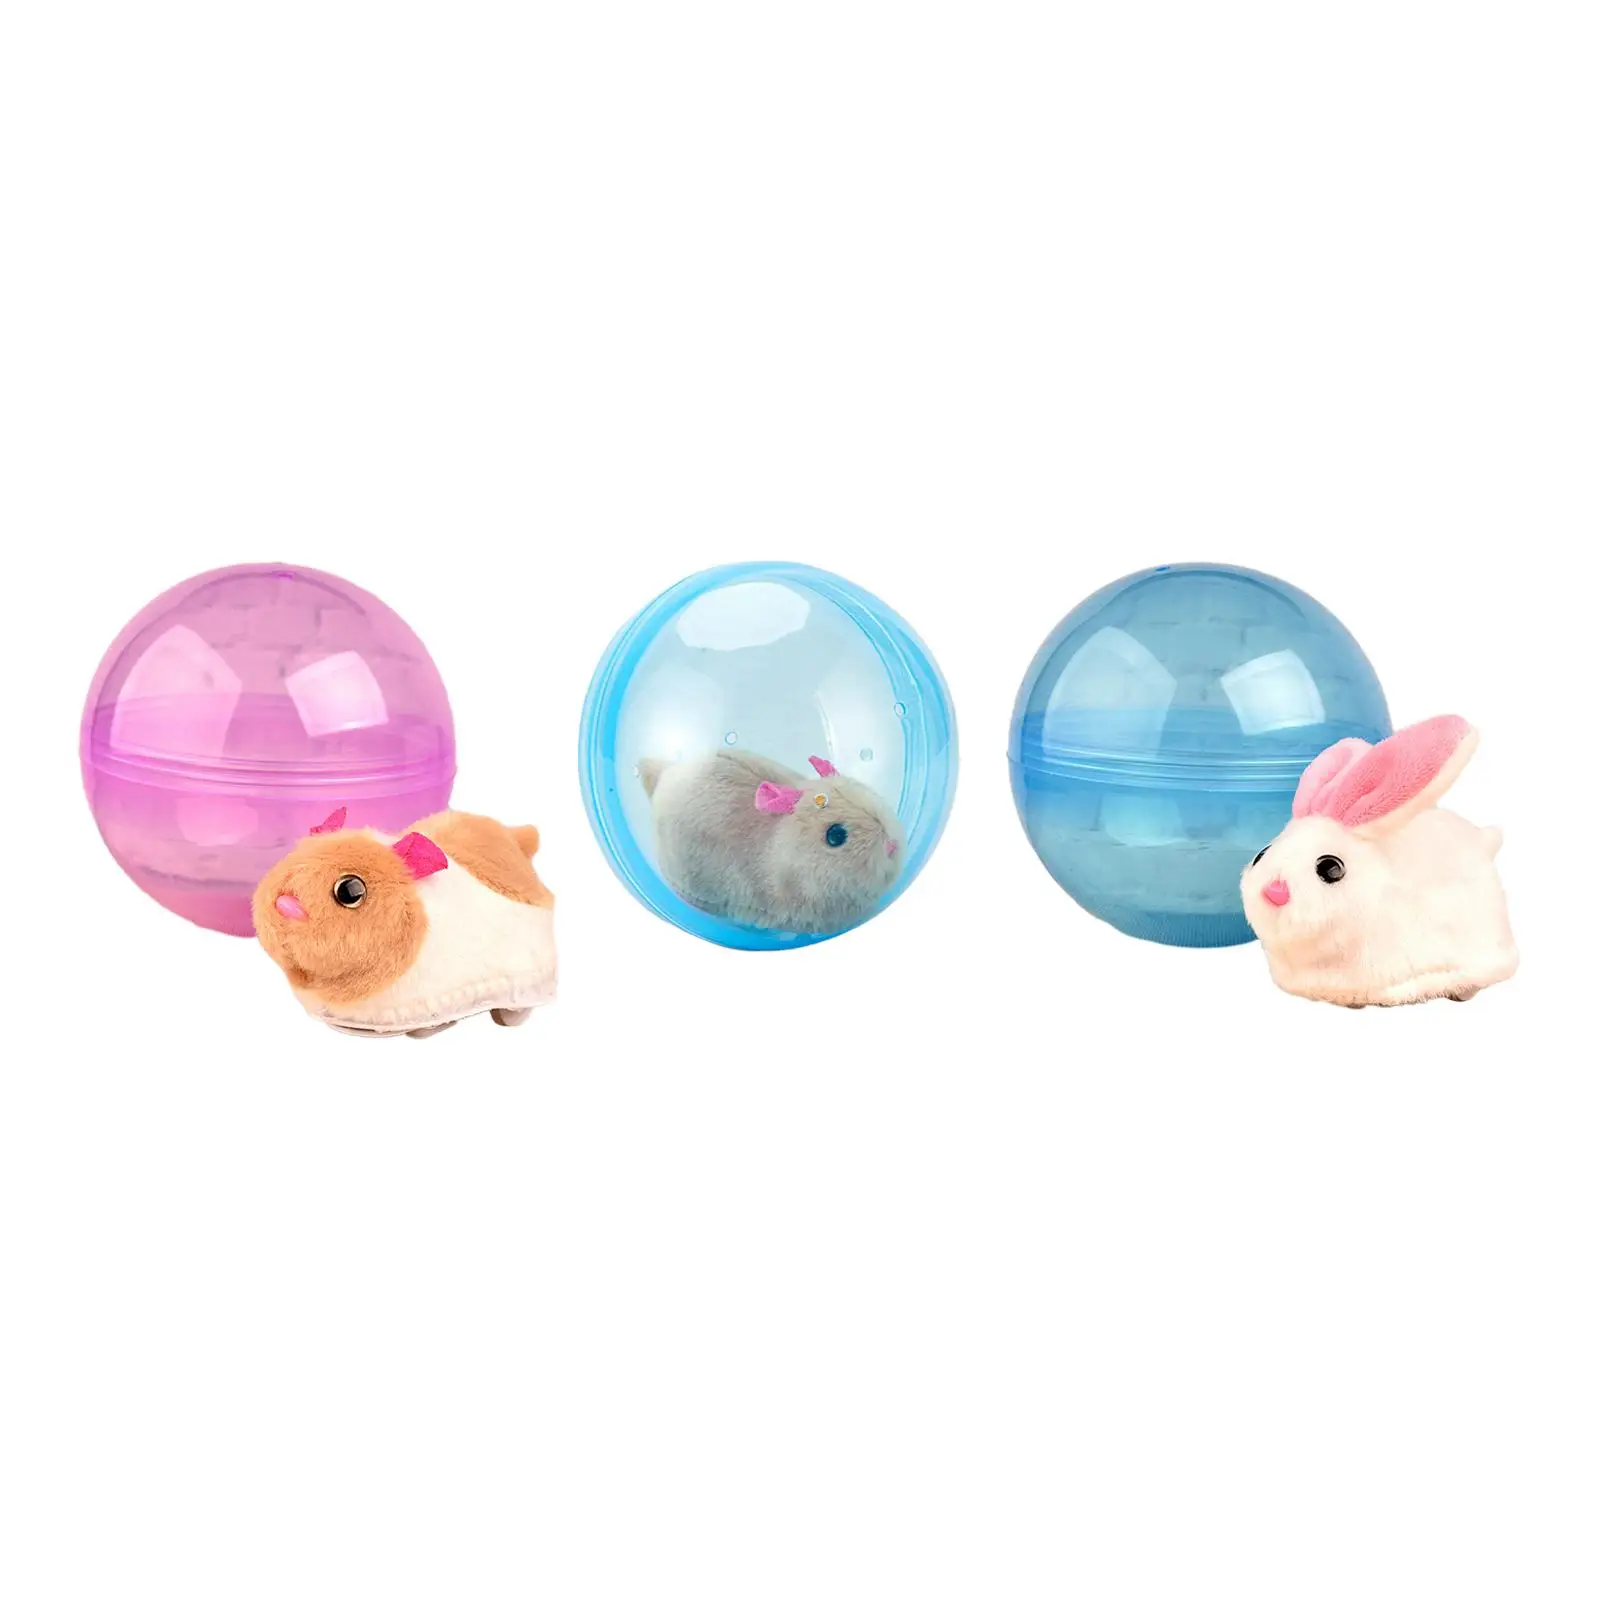 Electric Ball Toys Interactive Learning Walking Indoor Outdoor Playset Developmental Play Fun for Kids Boys Girls Holiday Gifts